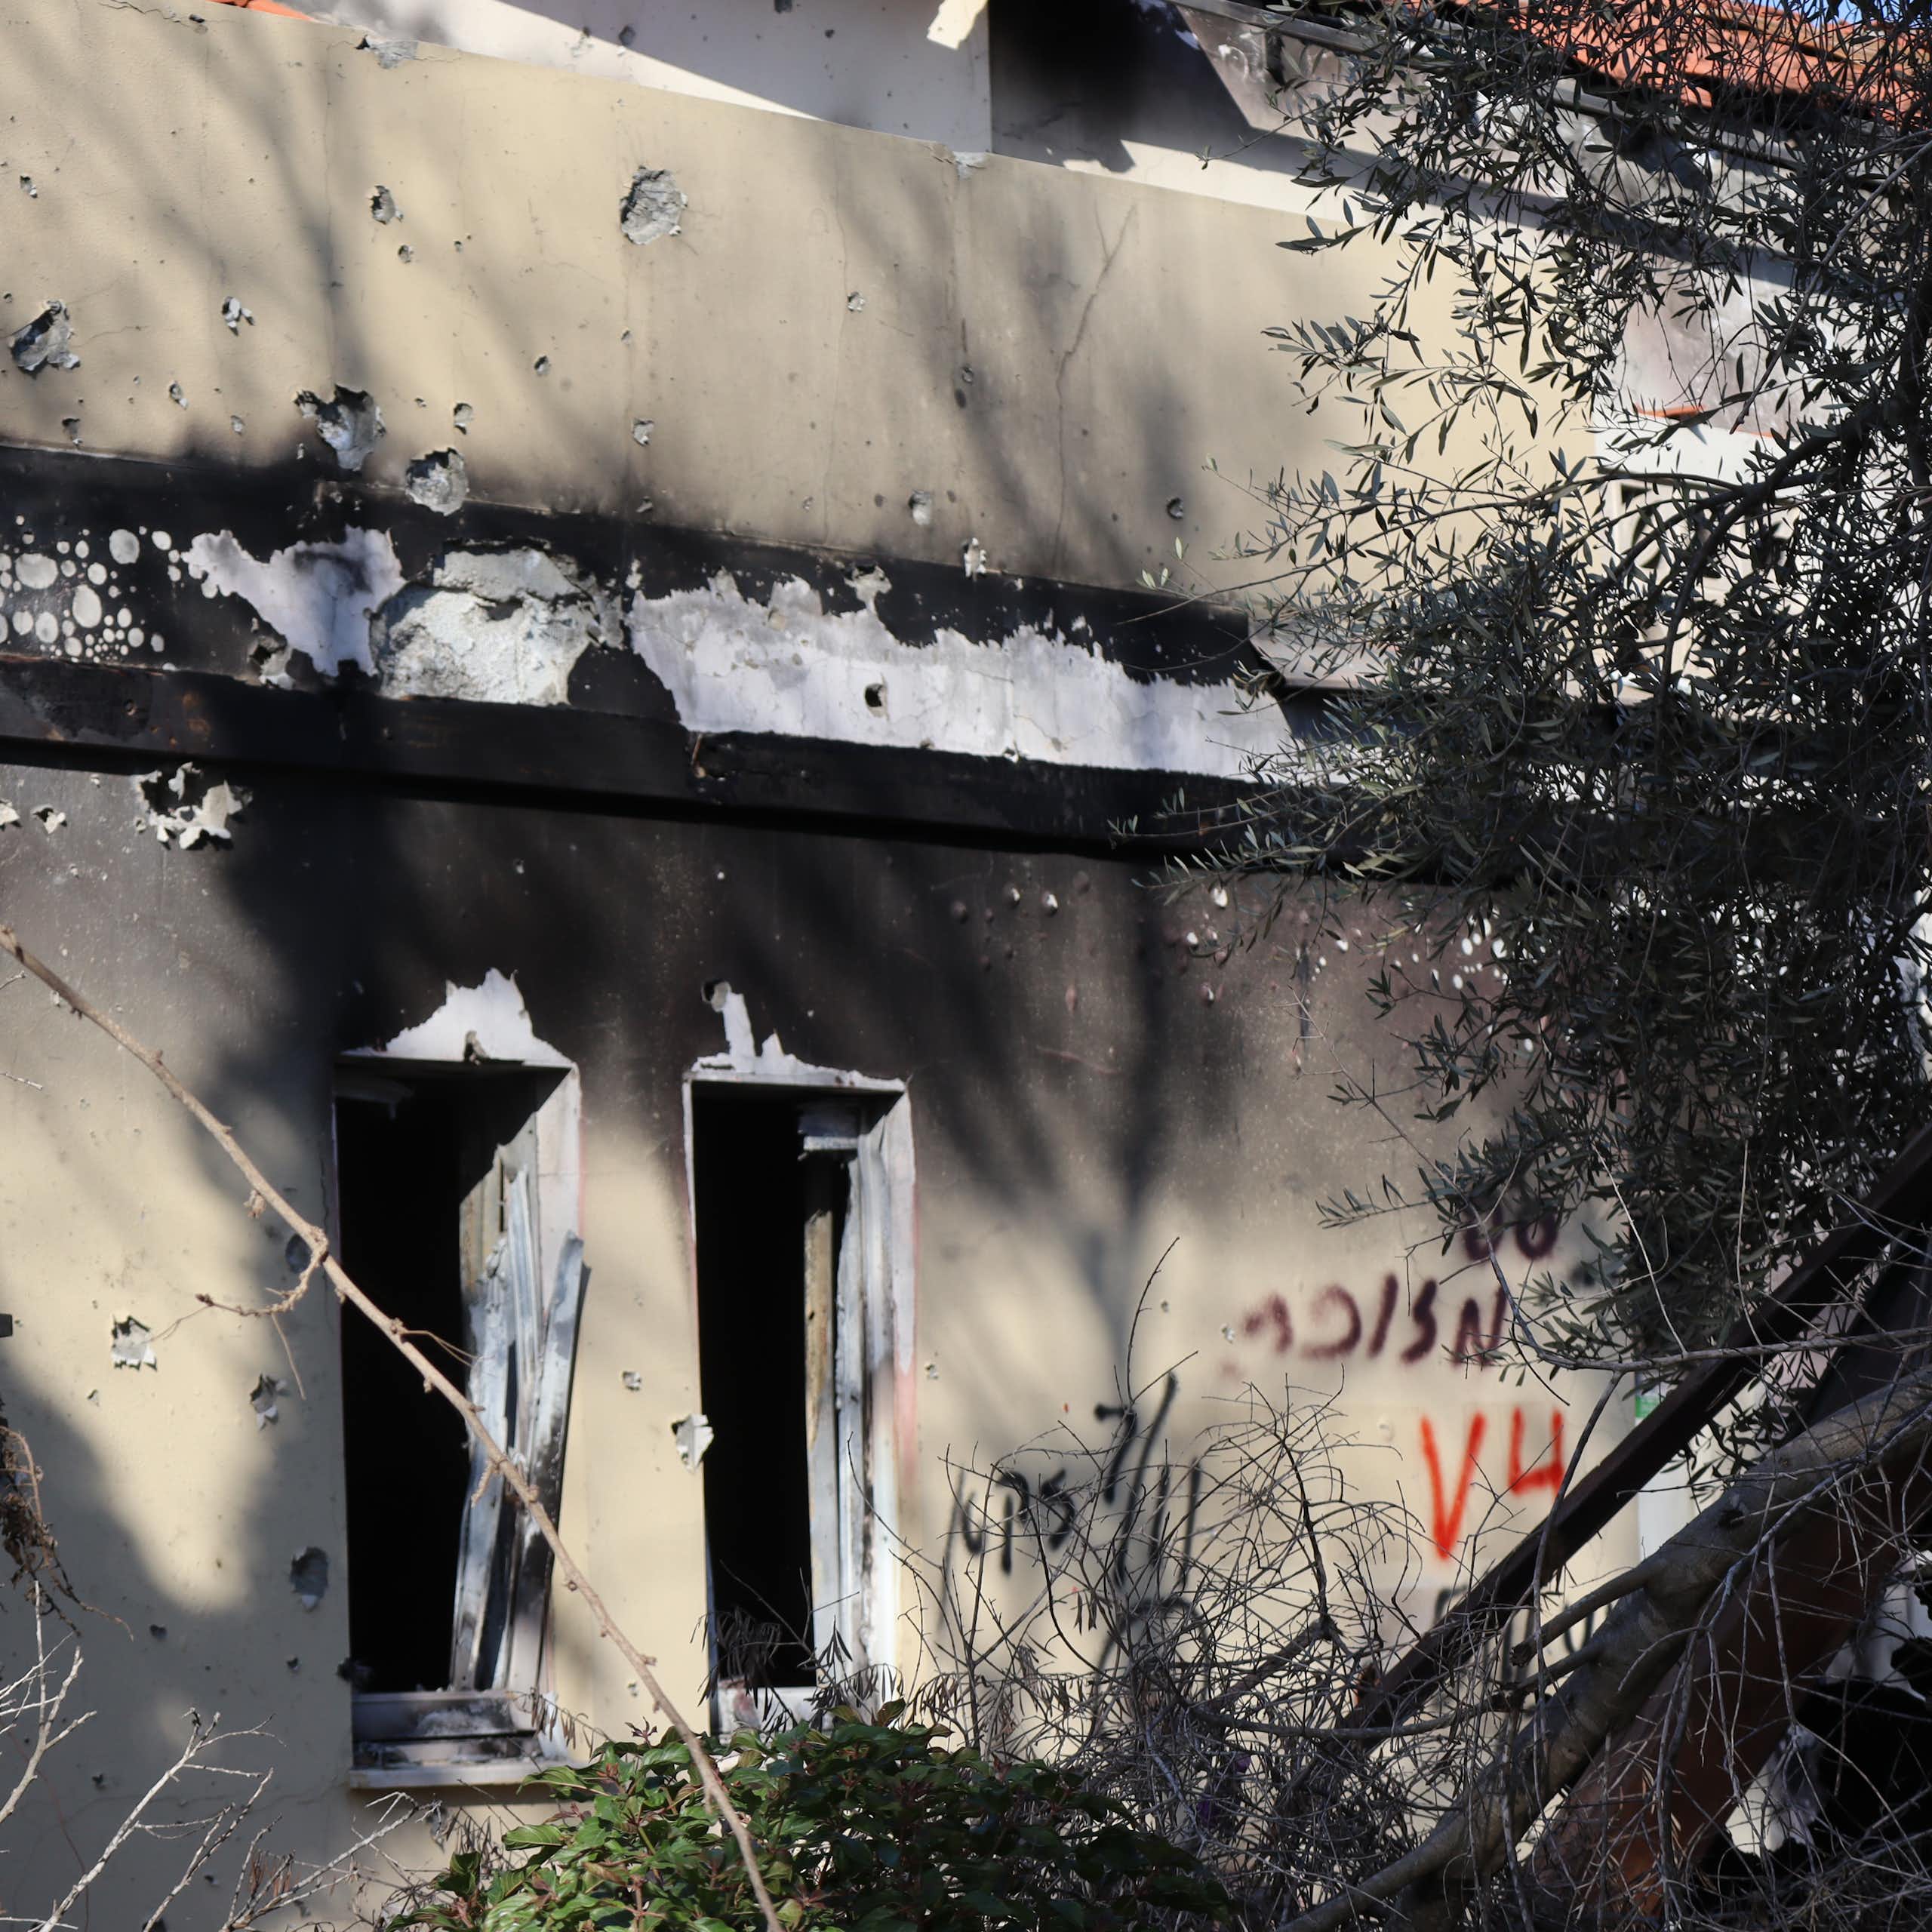 the exterior of a dwelling showing smoke and weapon damage